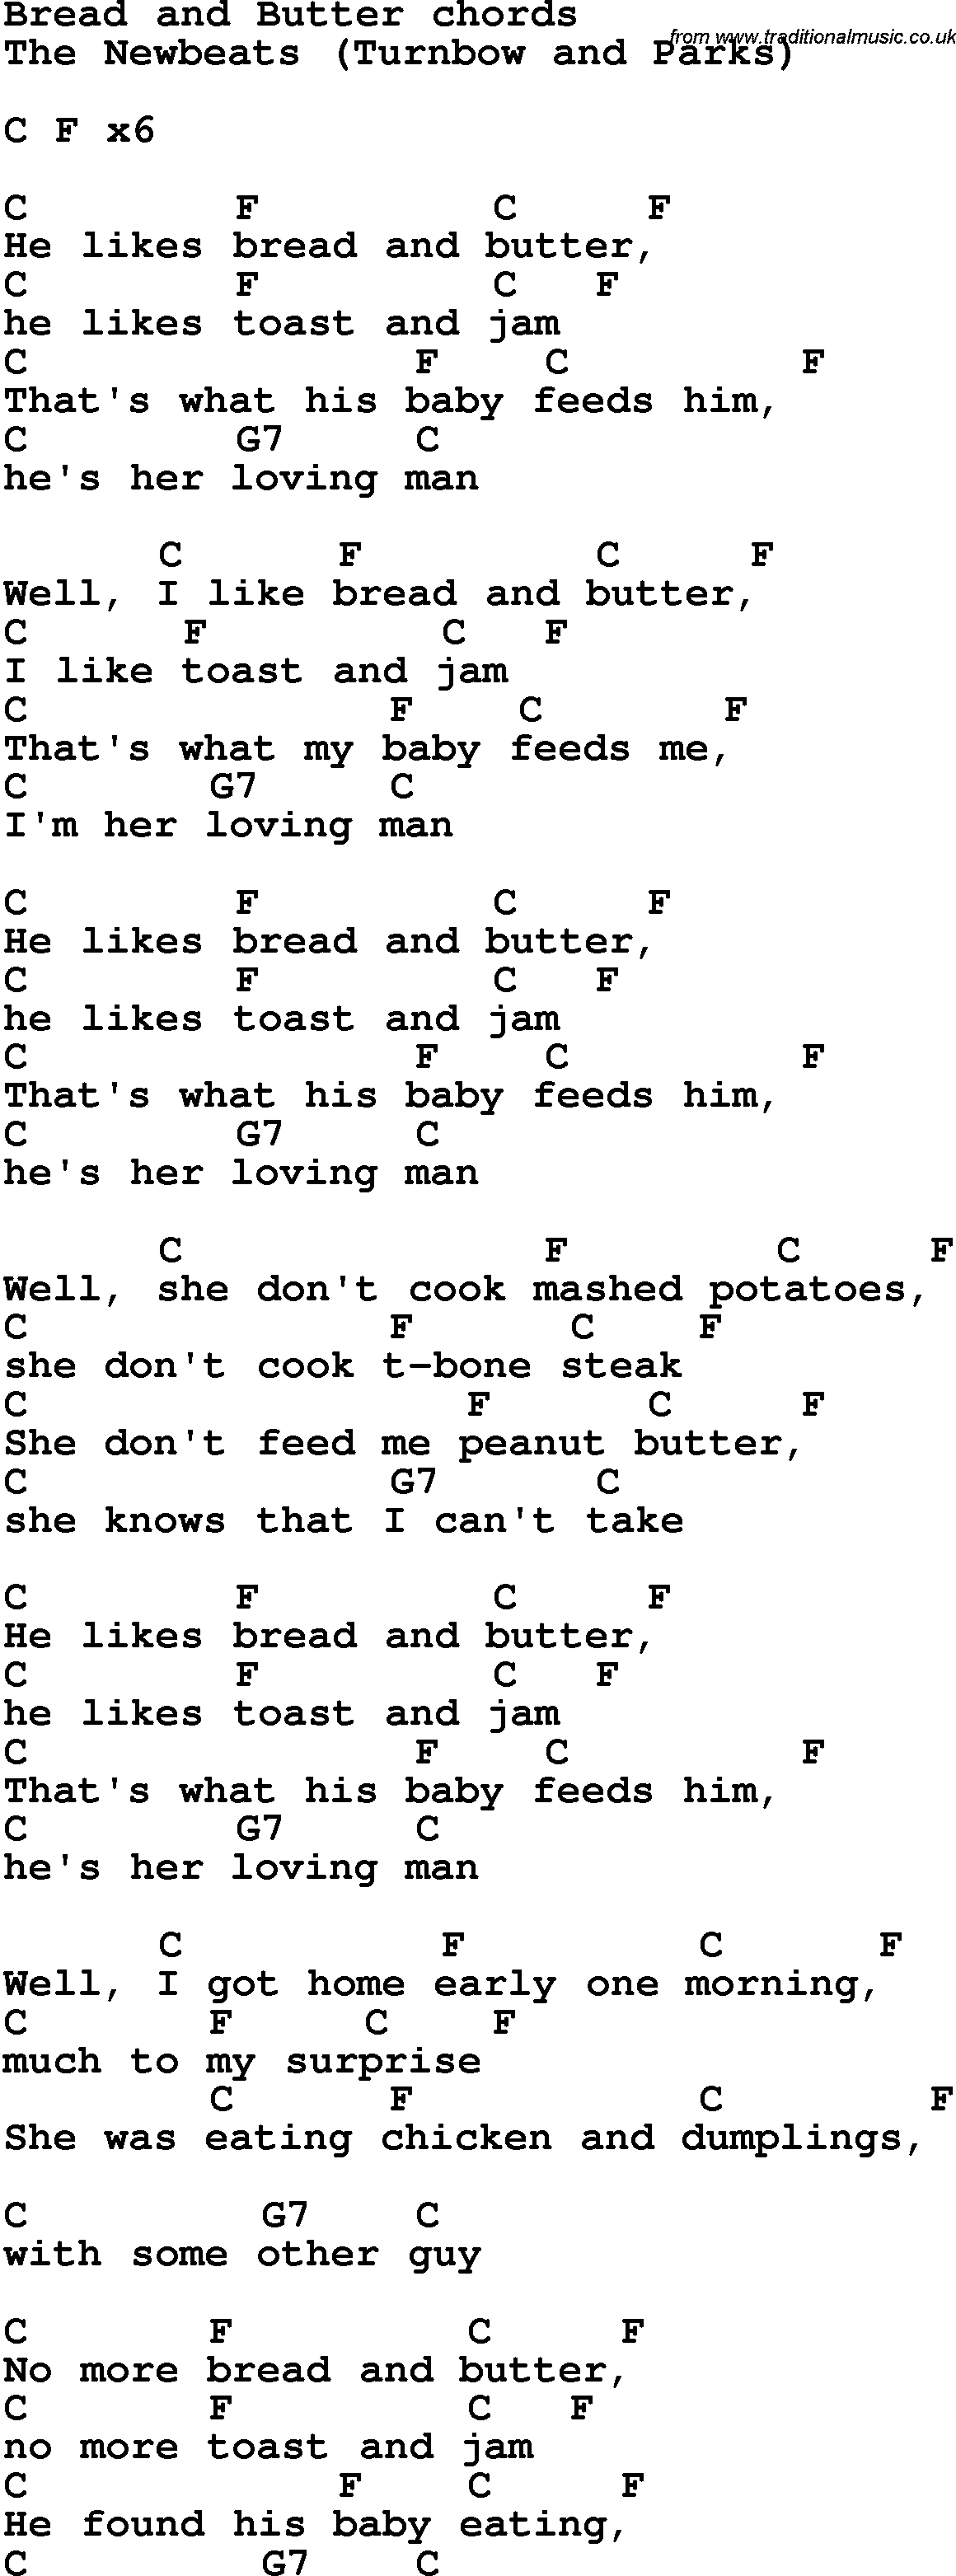 Song Lyrics with guitar chords for Bread And Butter